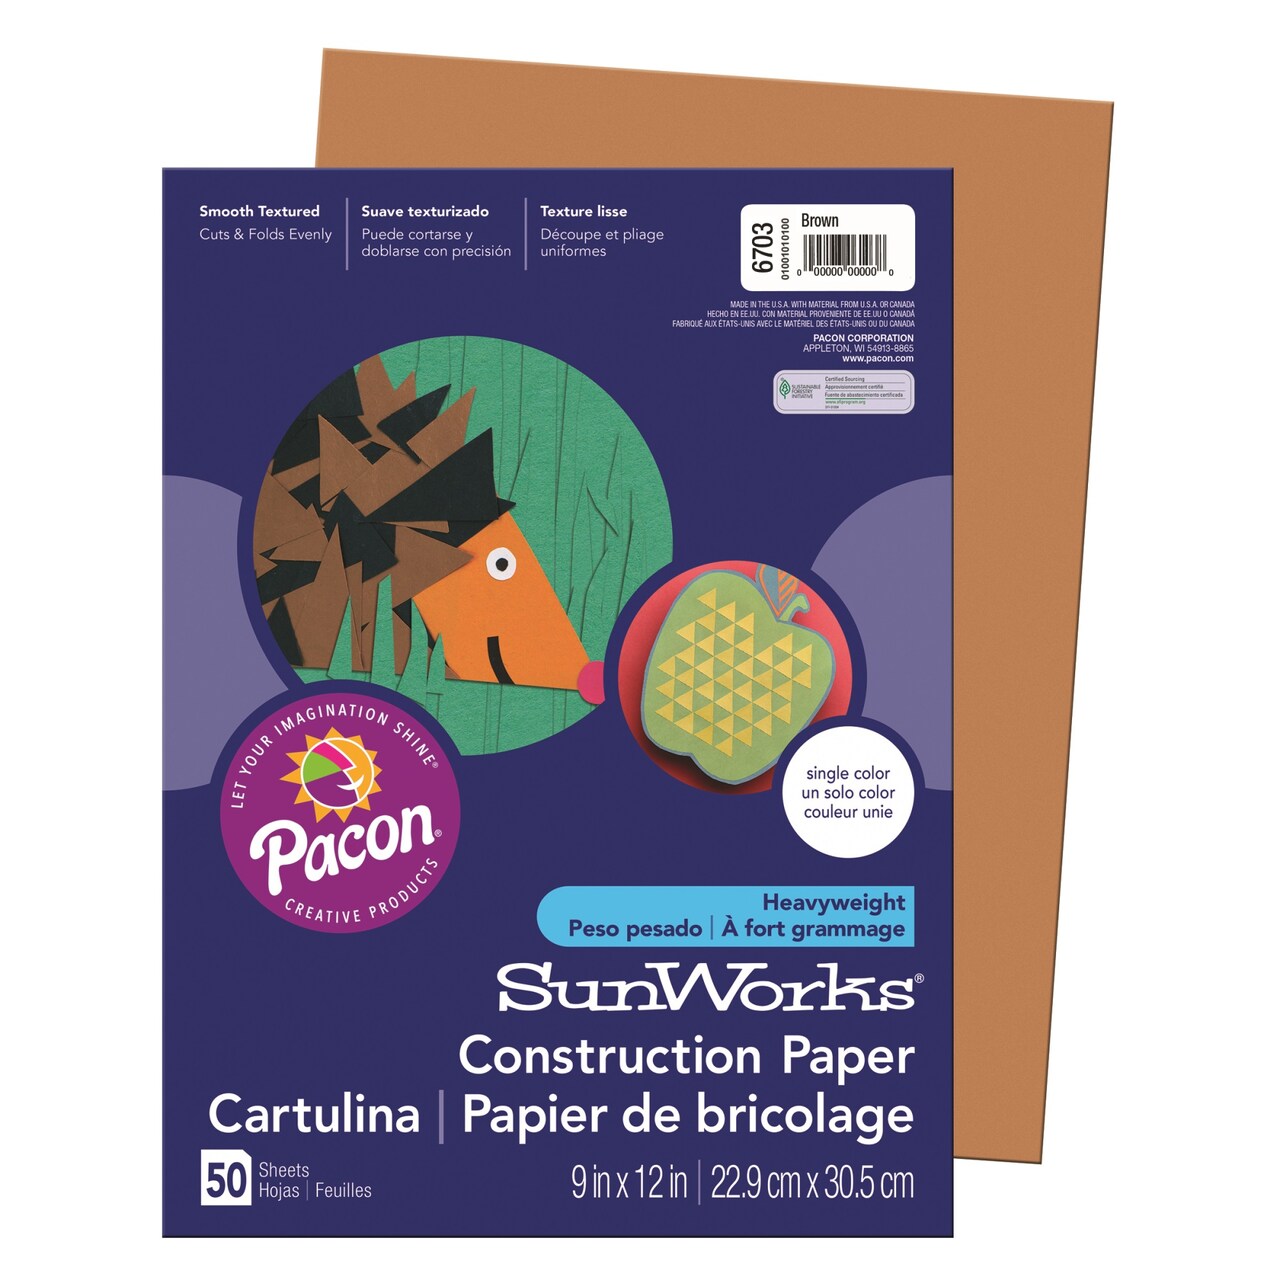 Brightly-colored, high-strength, heavyweight construction paper with long,  strong fibers that cut clean and fold evenly without cracking. All purpose,  high bulk, smooth textured. Made with a chemical-free pulping process to  help ensure